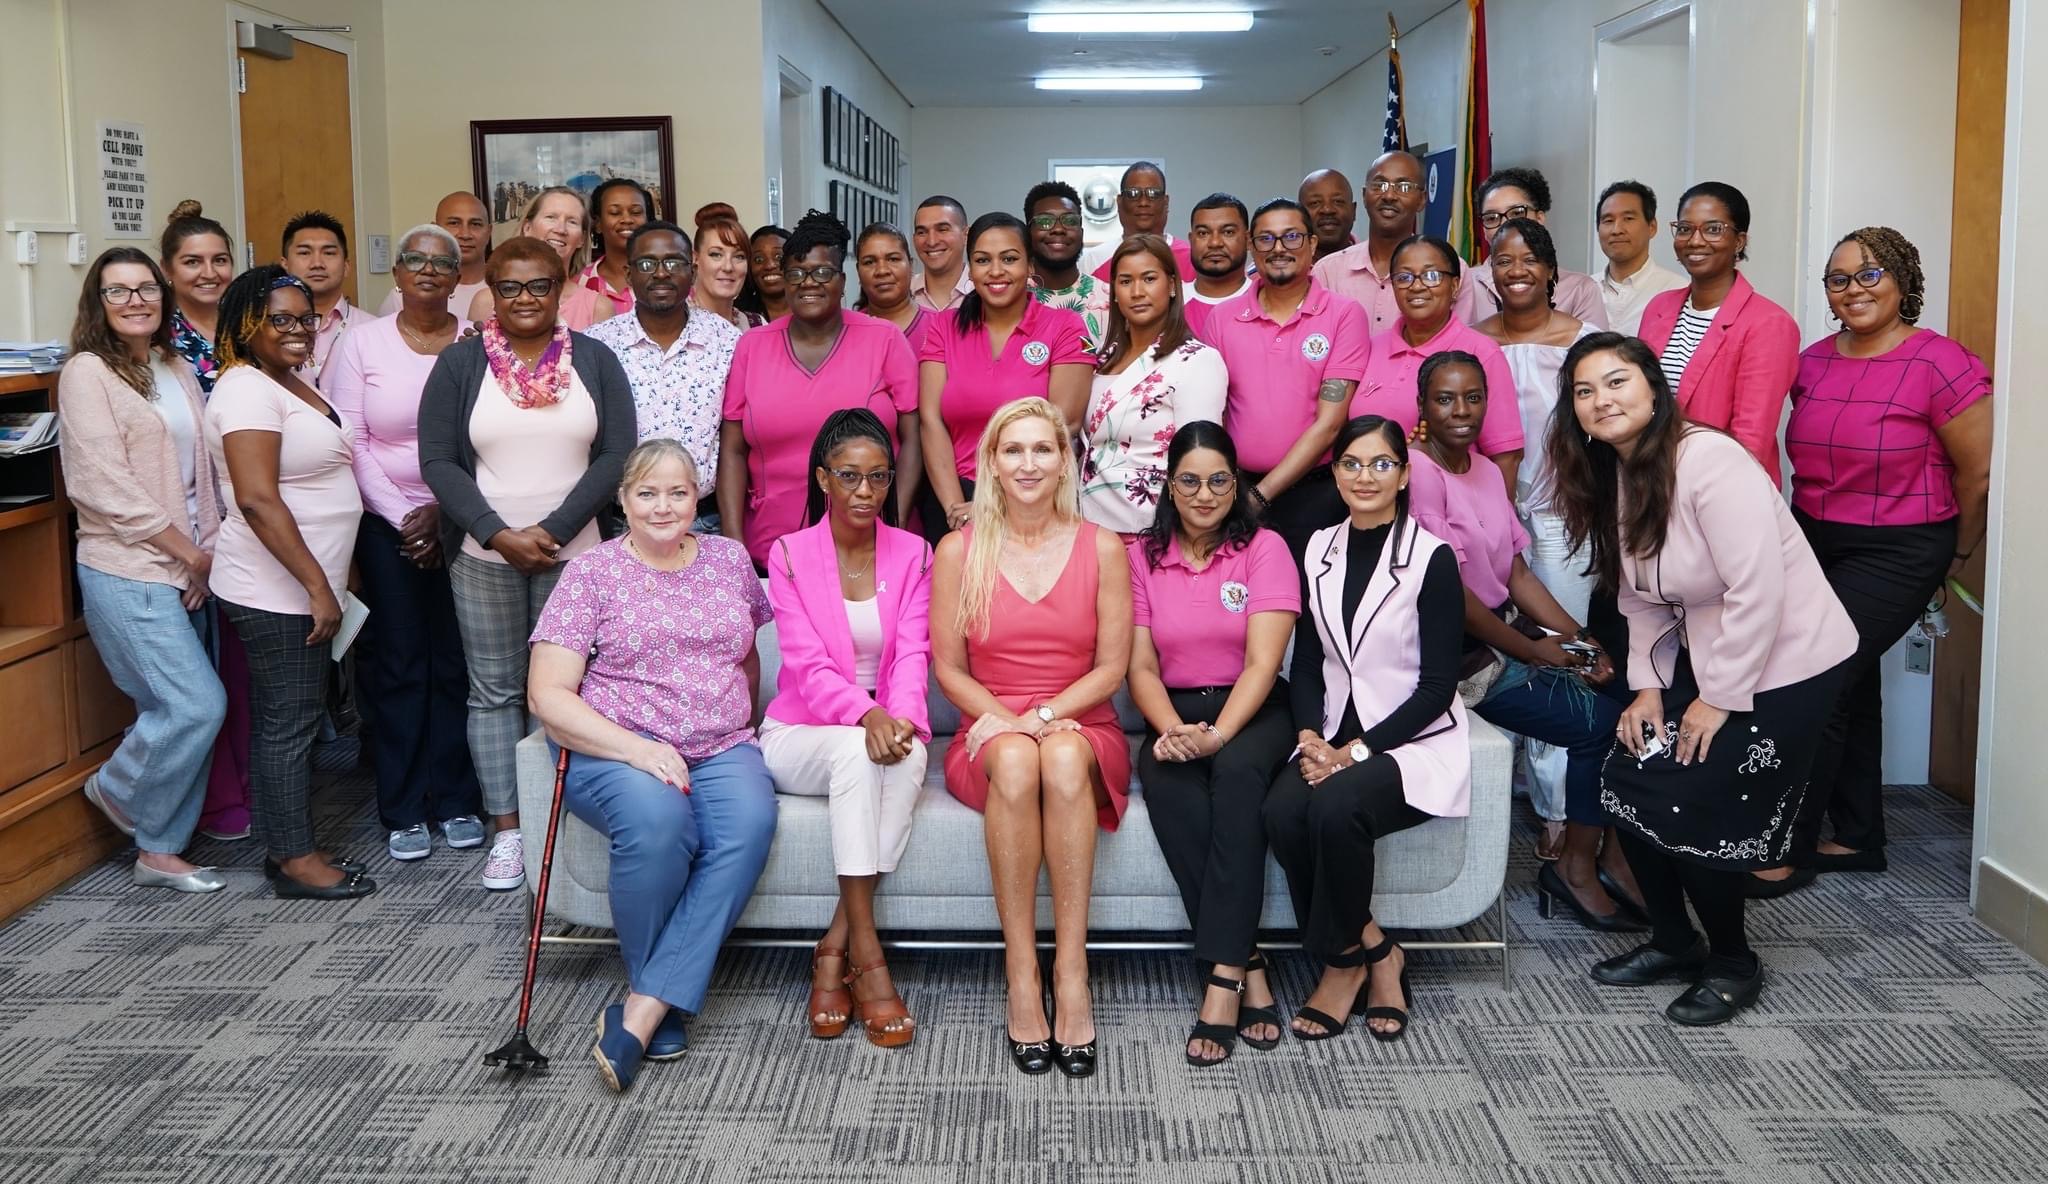 Nicole Theriot in group photo with women at cancer awareness event